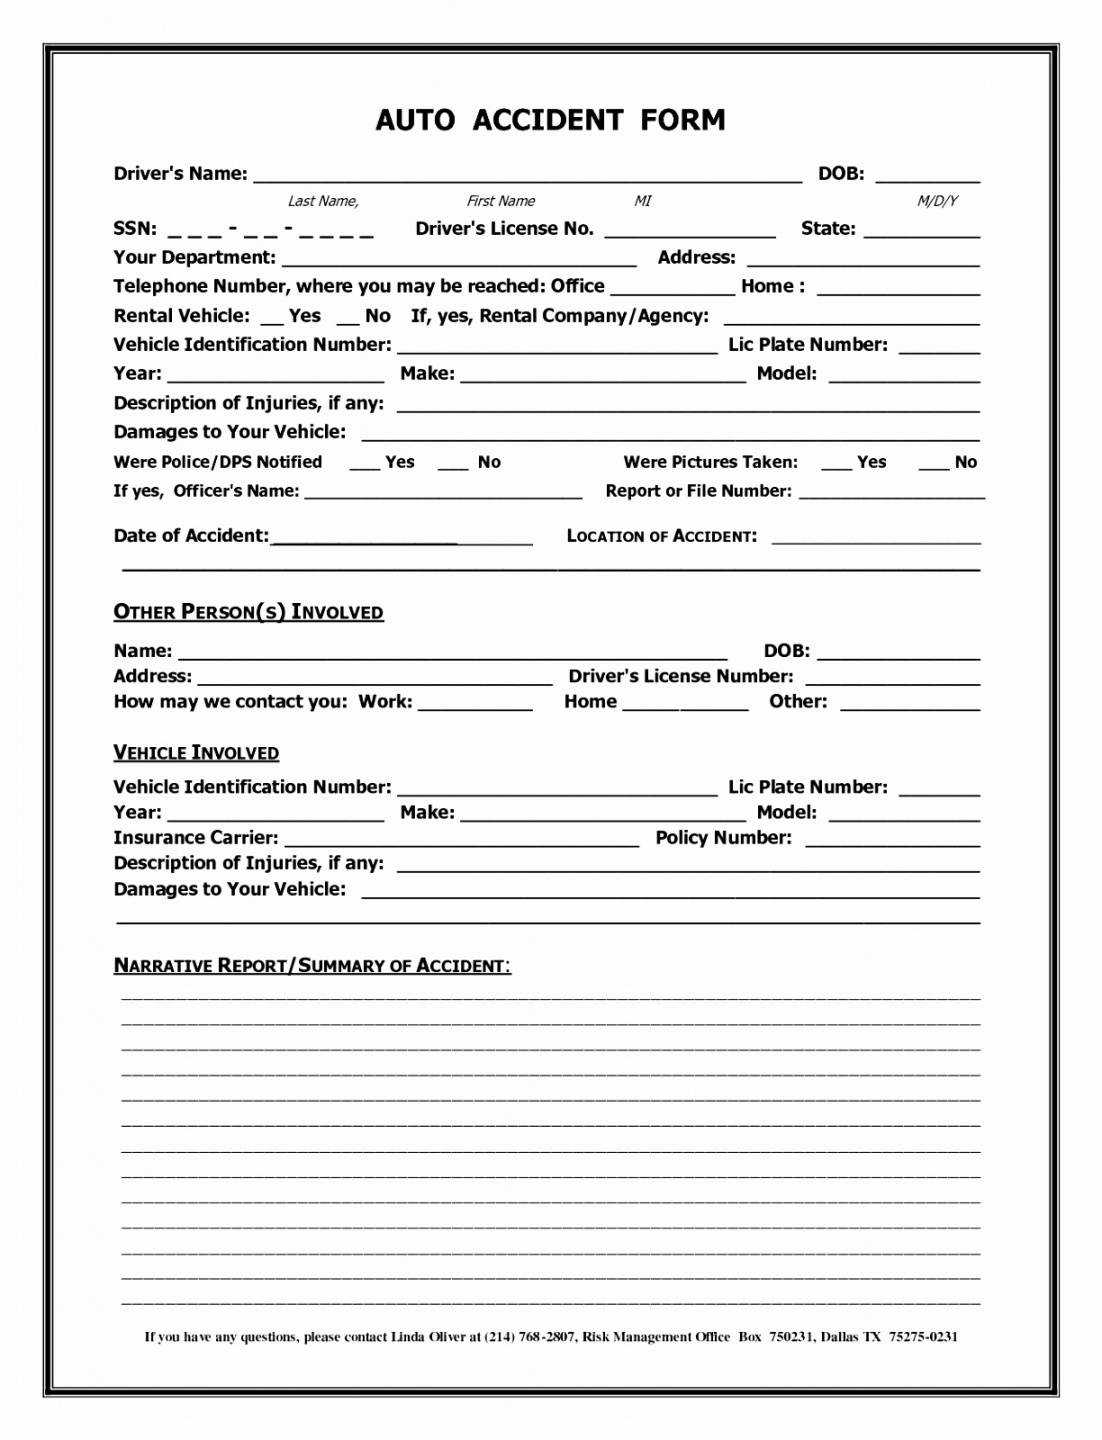 004 Template Ideas Accident Reporting Form Report Uk Of With Regard To Vehicle Accident Report Template